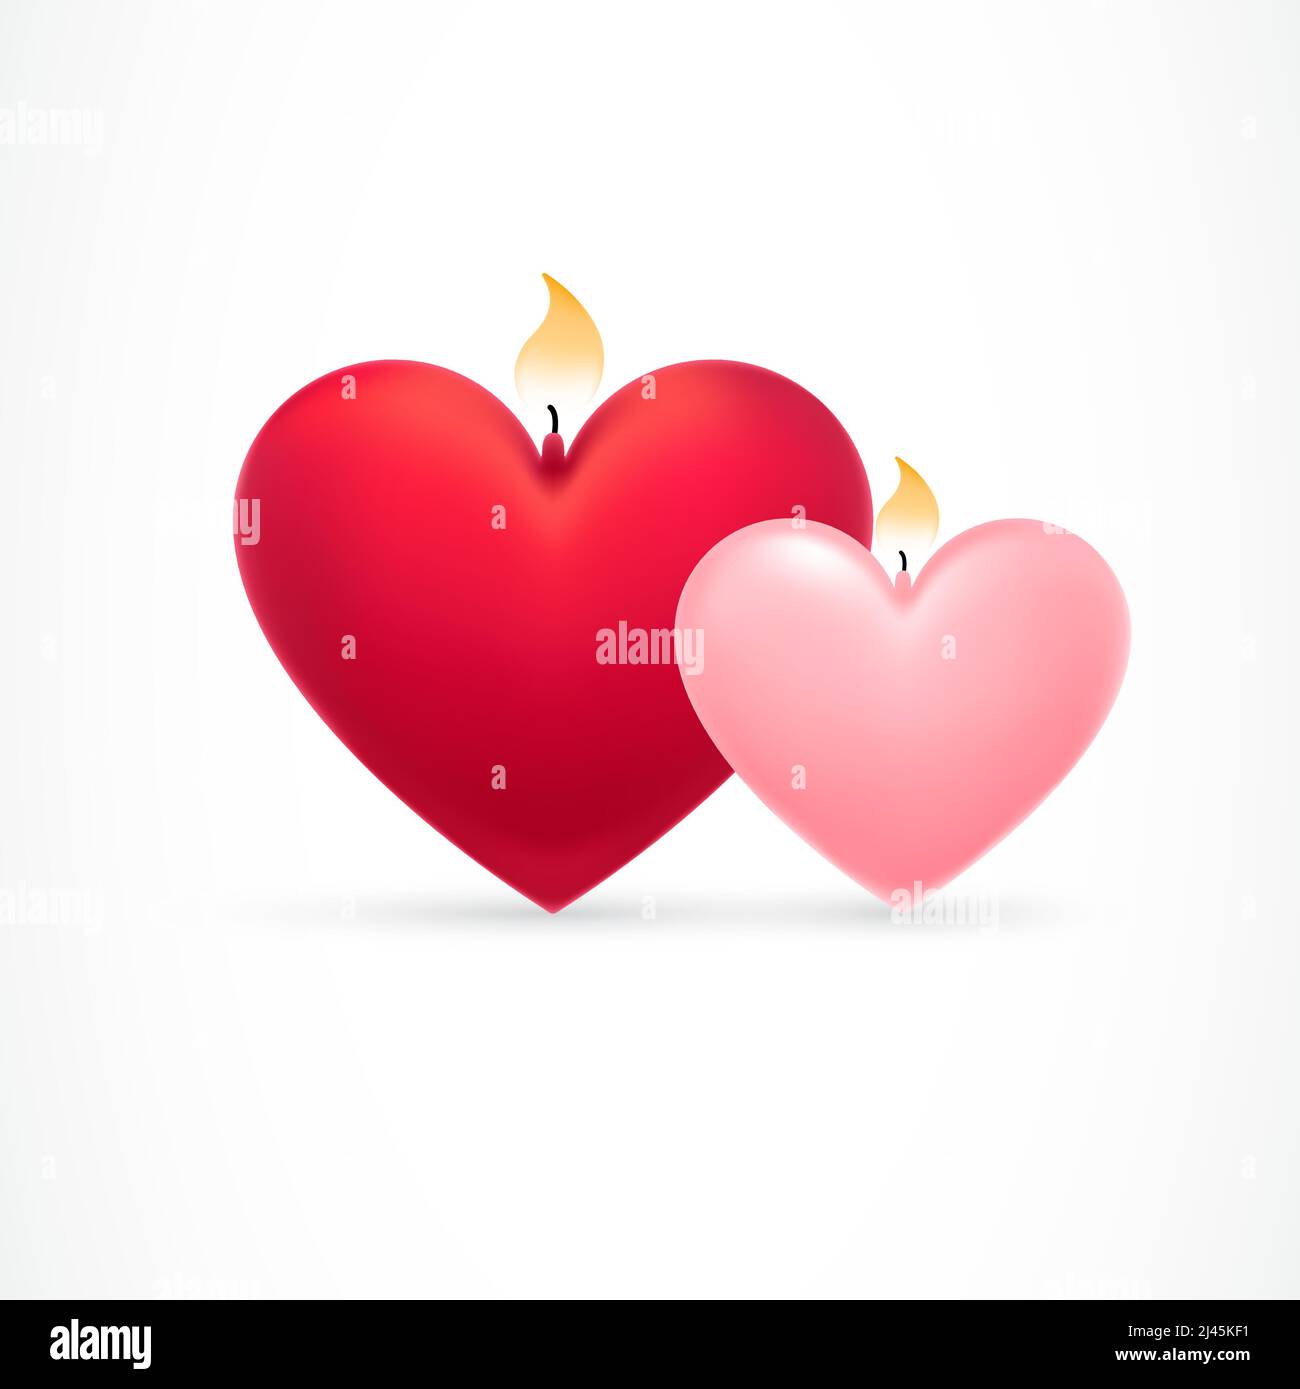 Pink and red beautiful hearts with flames. Celebration, romance, love. Valentines day concept. Can be used for greeting cards, posters, leaflets and b Stock Vector